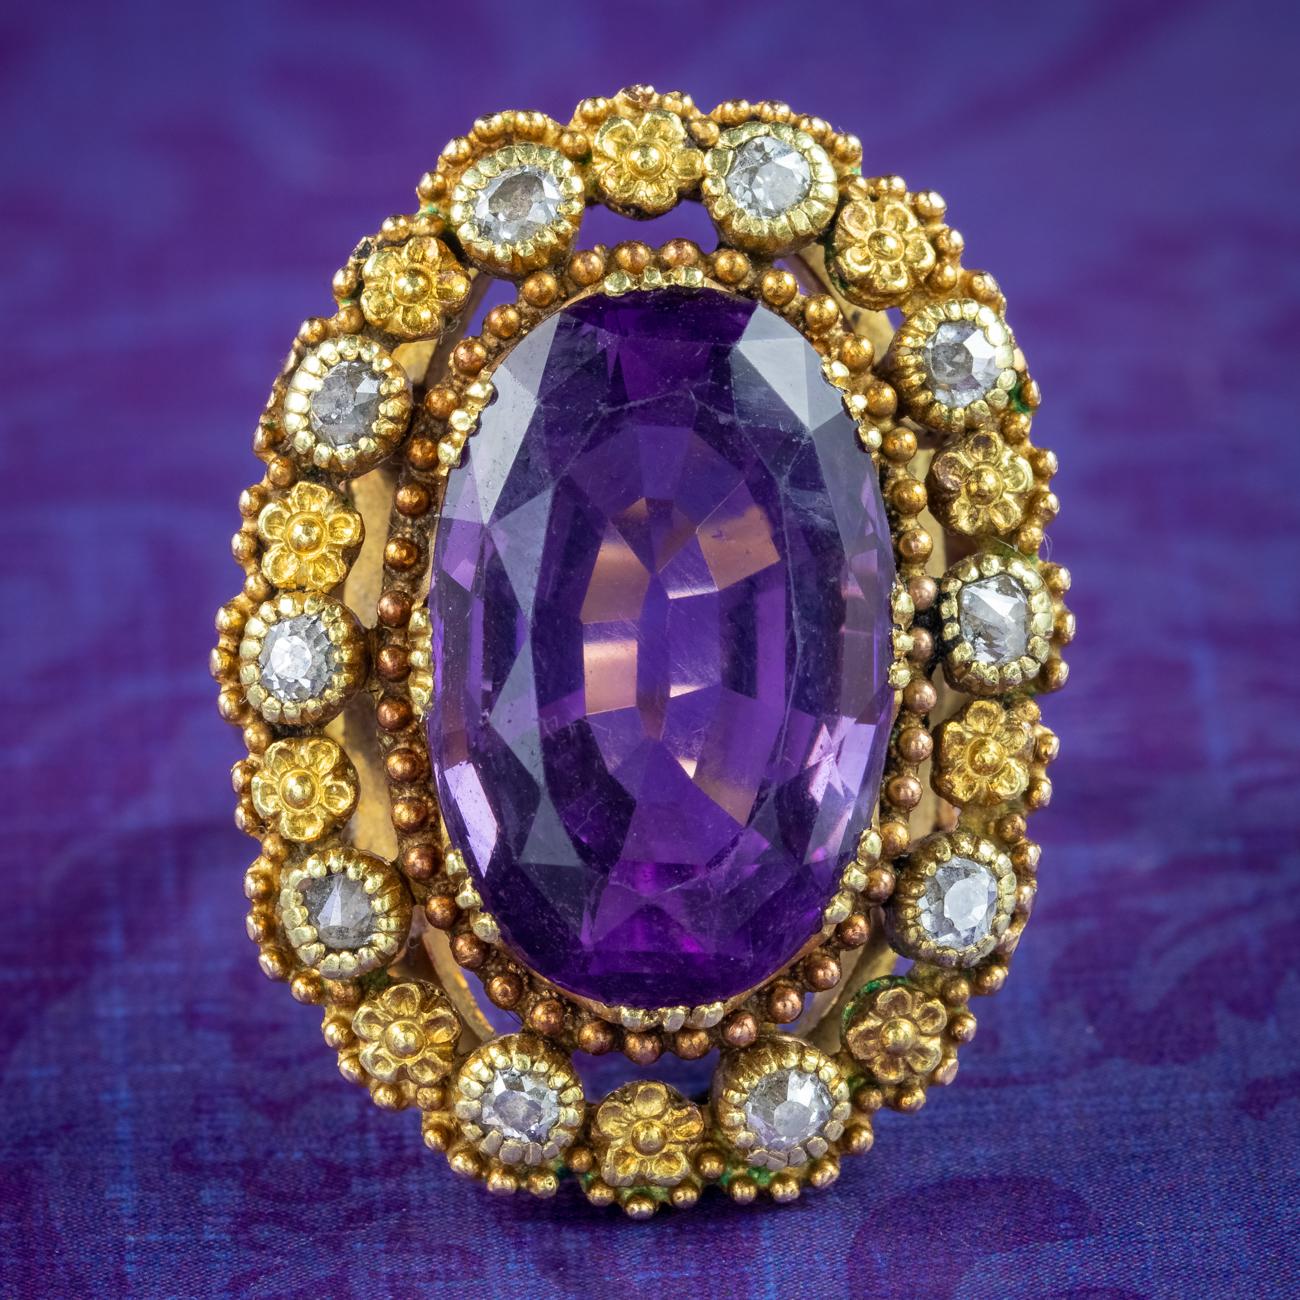 An impressive antique Victorian statement ring built around a large oval cut amethyst in the centre, weighing approx. 7.2 carats. It has a deep, regal purple hue and is framed in an ornate, cannetille style gallery encircled with gold beading,